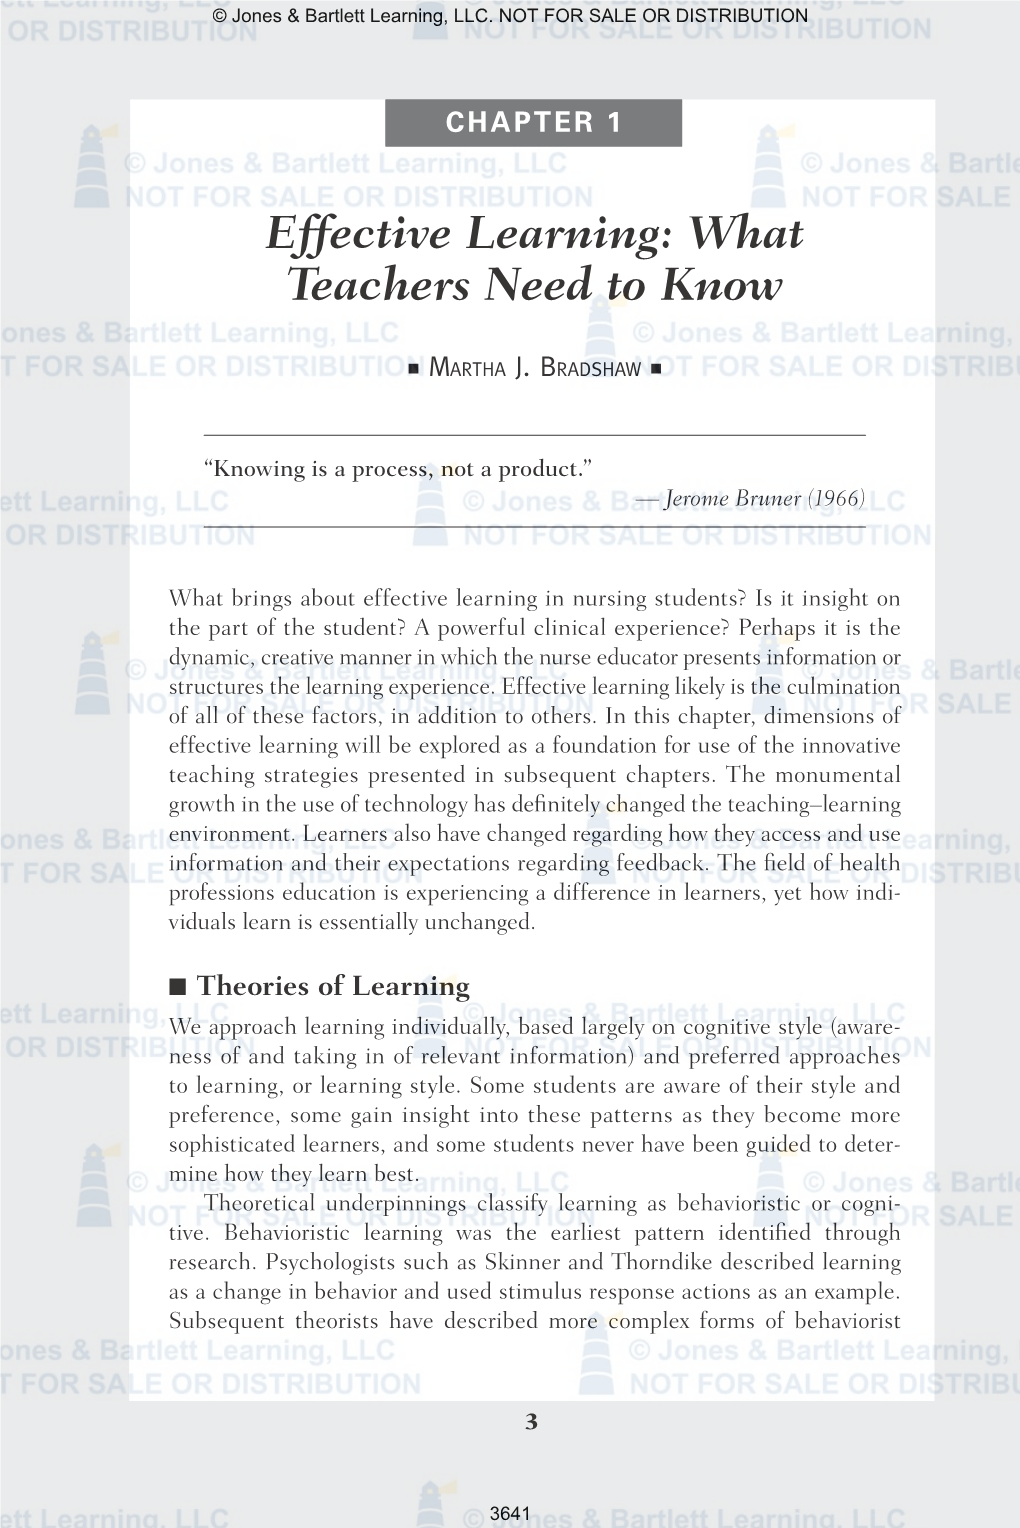 Effective Learning: What Teachers Need to Know